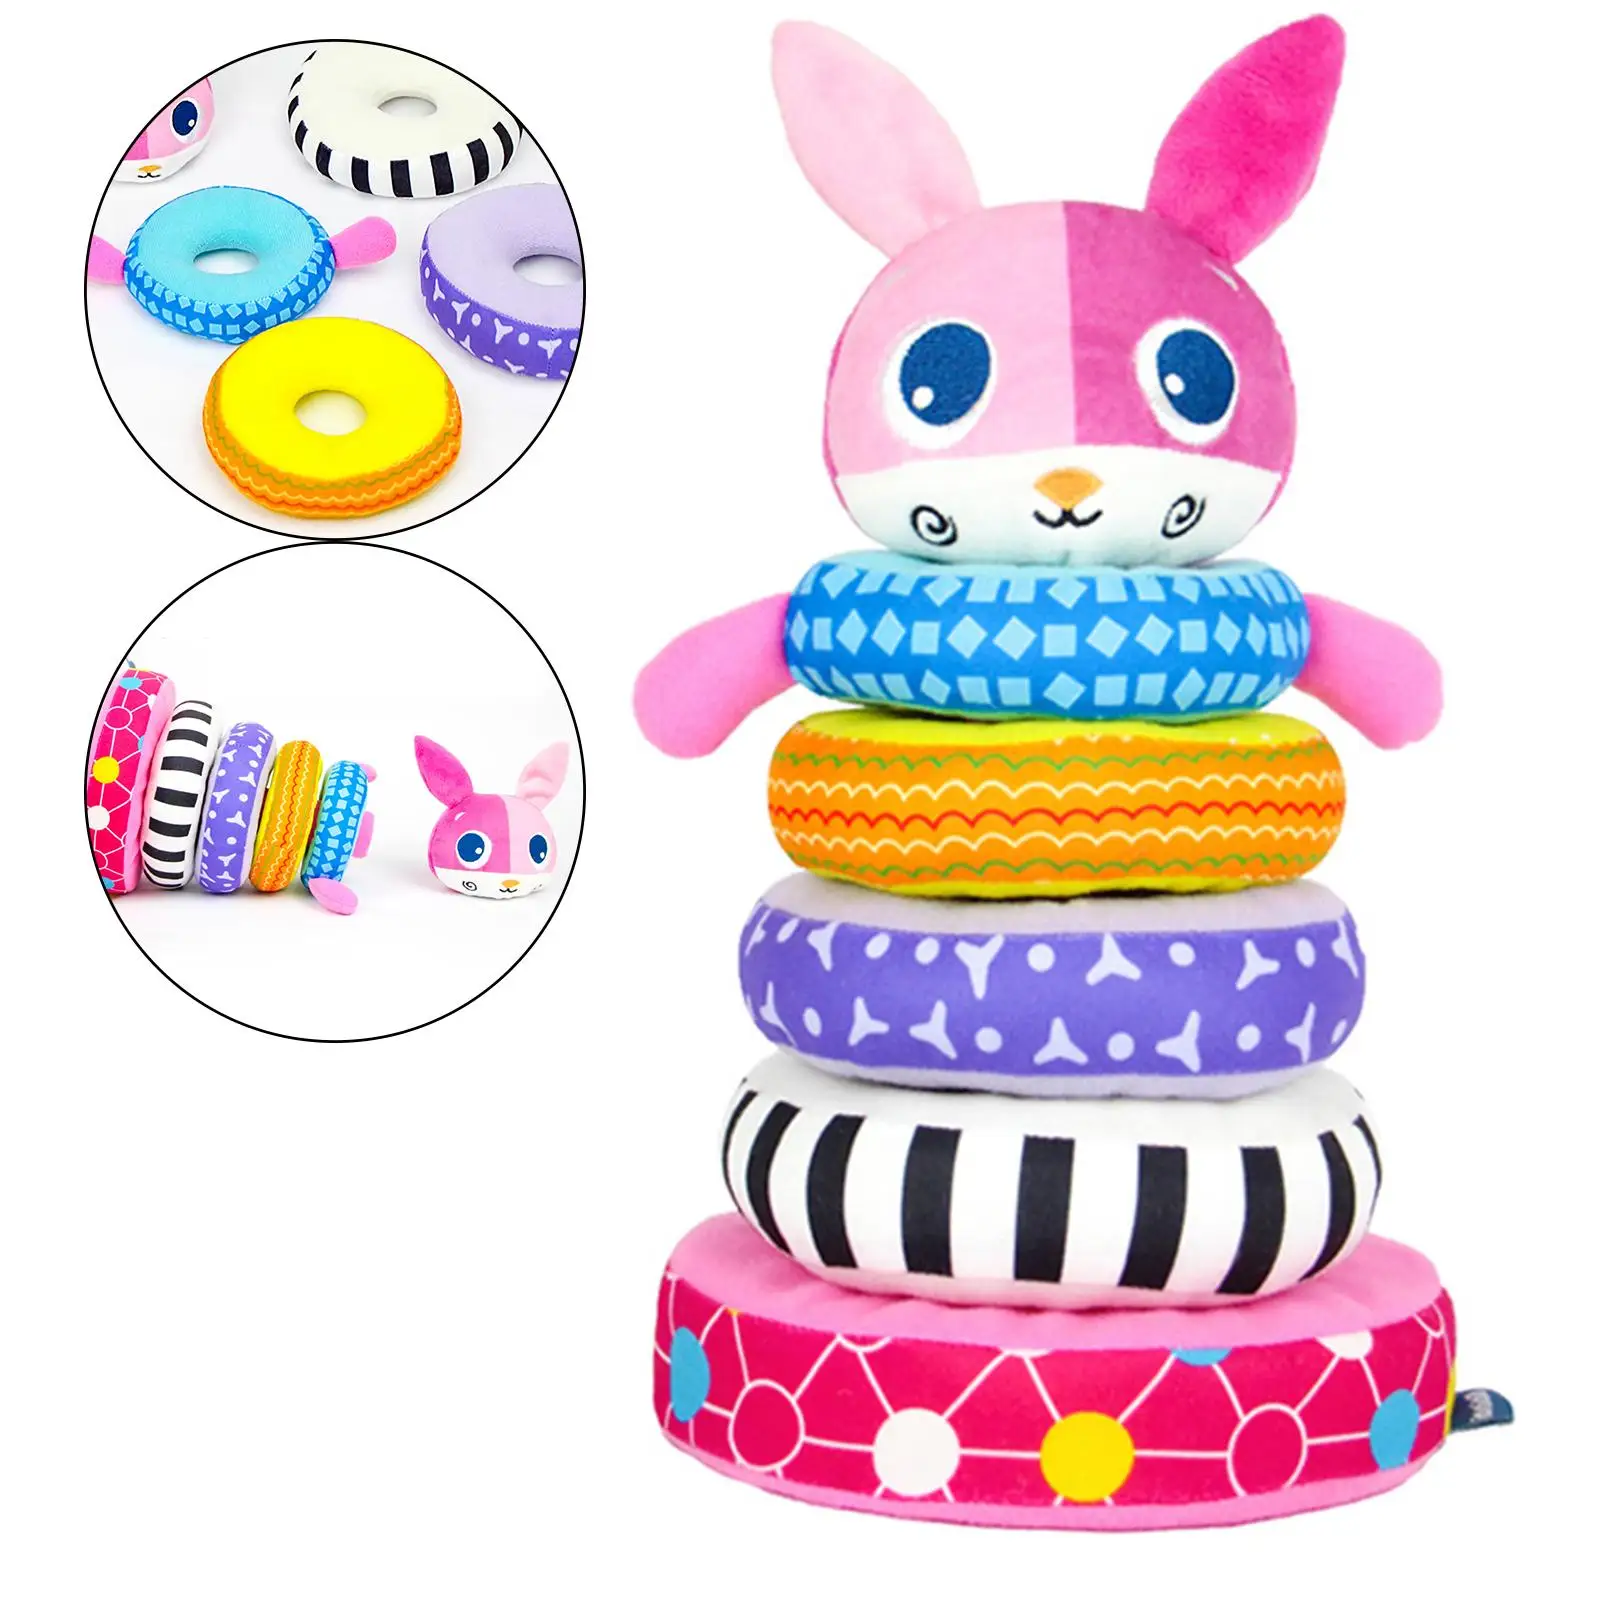 Rainbow Stacking  Fine  Teaching Aids with Sound Soft Building Blocks for Boys Girls Toddler Kids Children